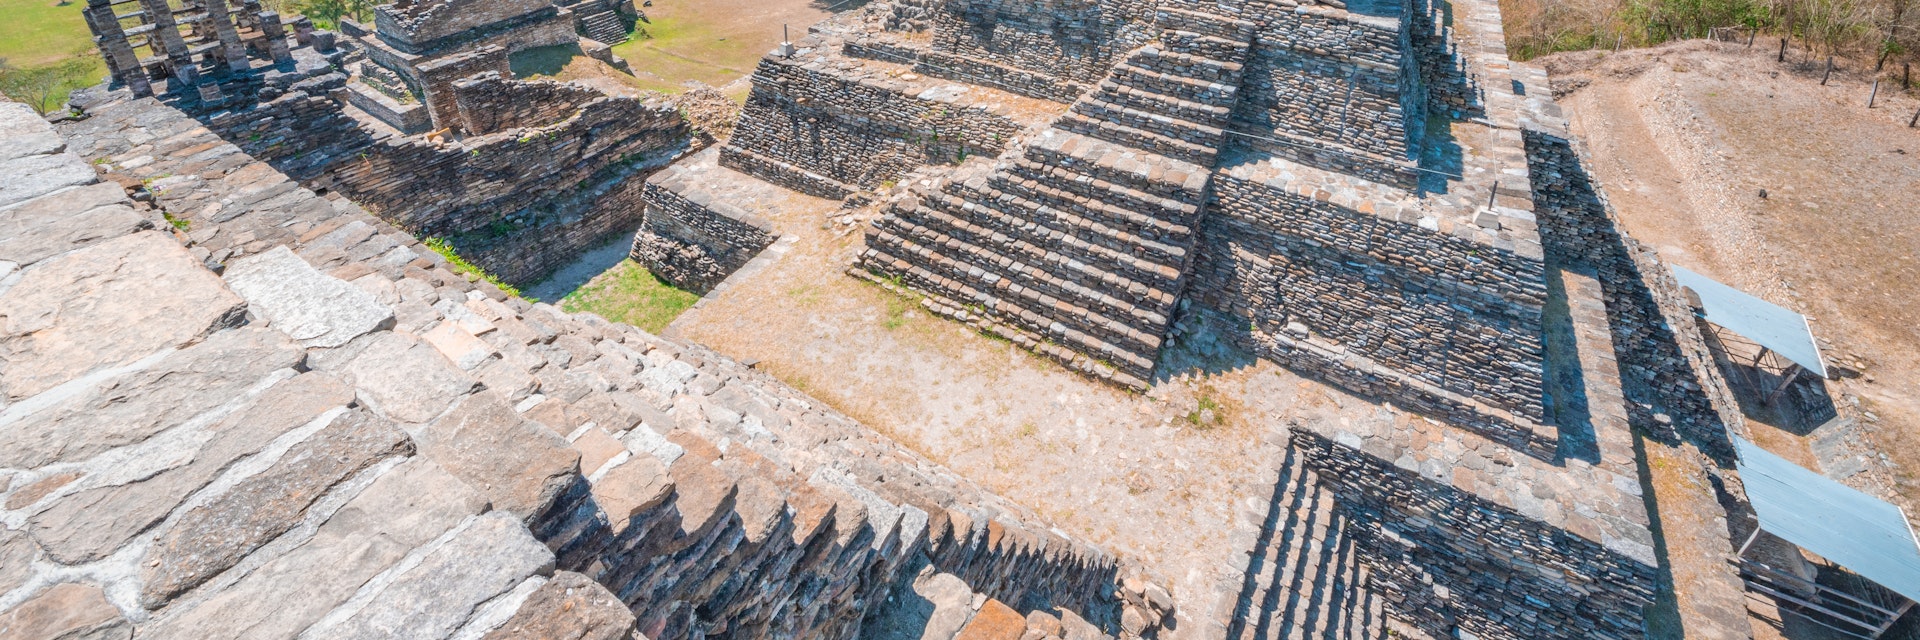 The ancient pyramids of Tonina, a Mayan Archaeological Site in Chiapas, Mexico.